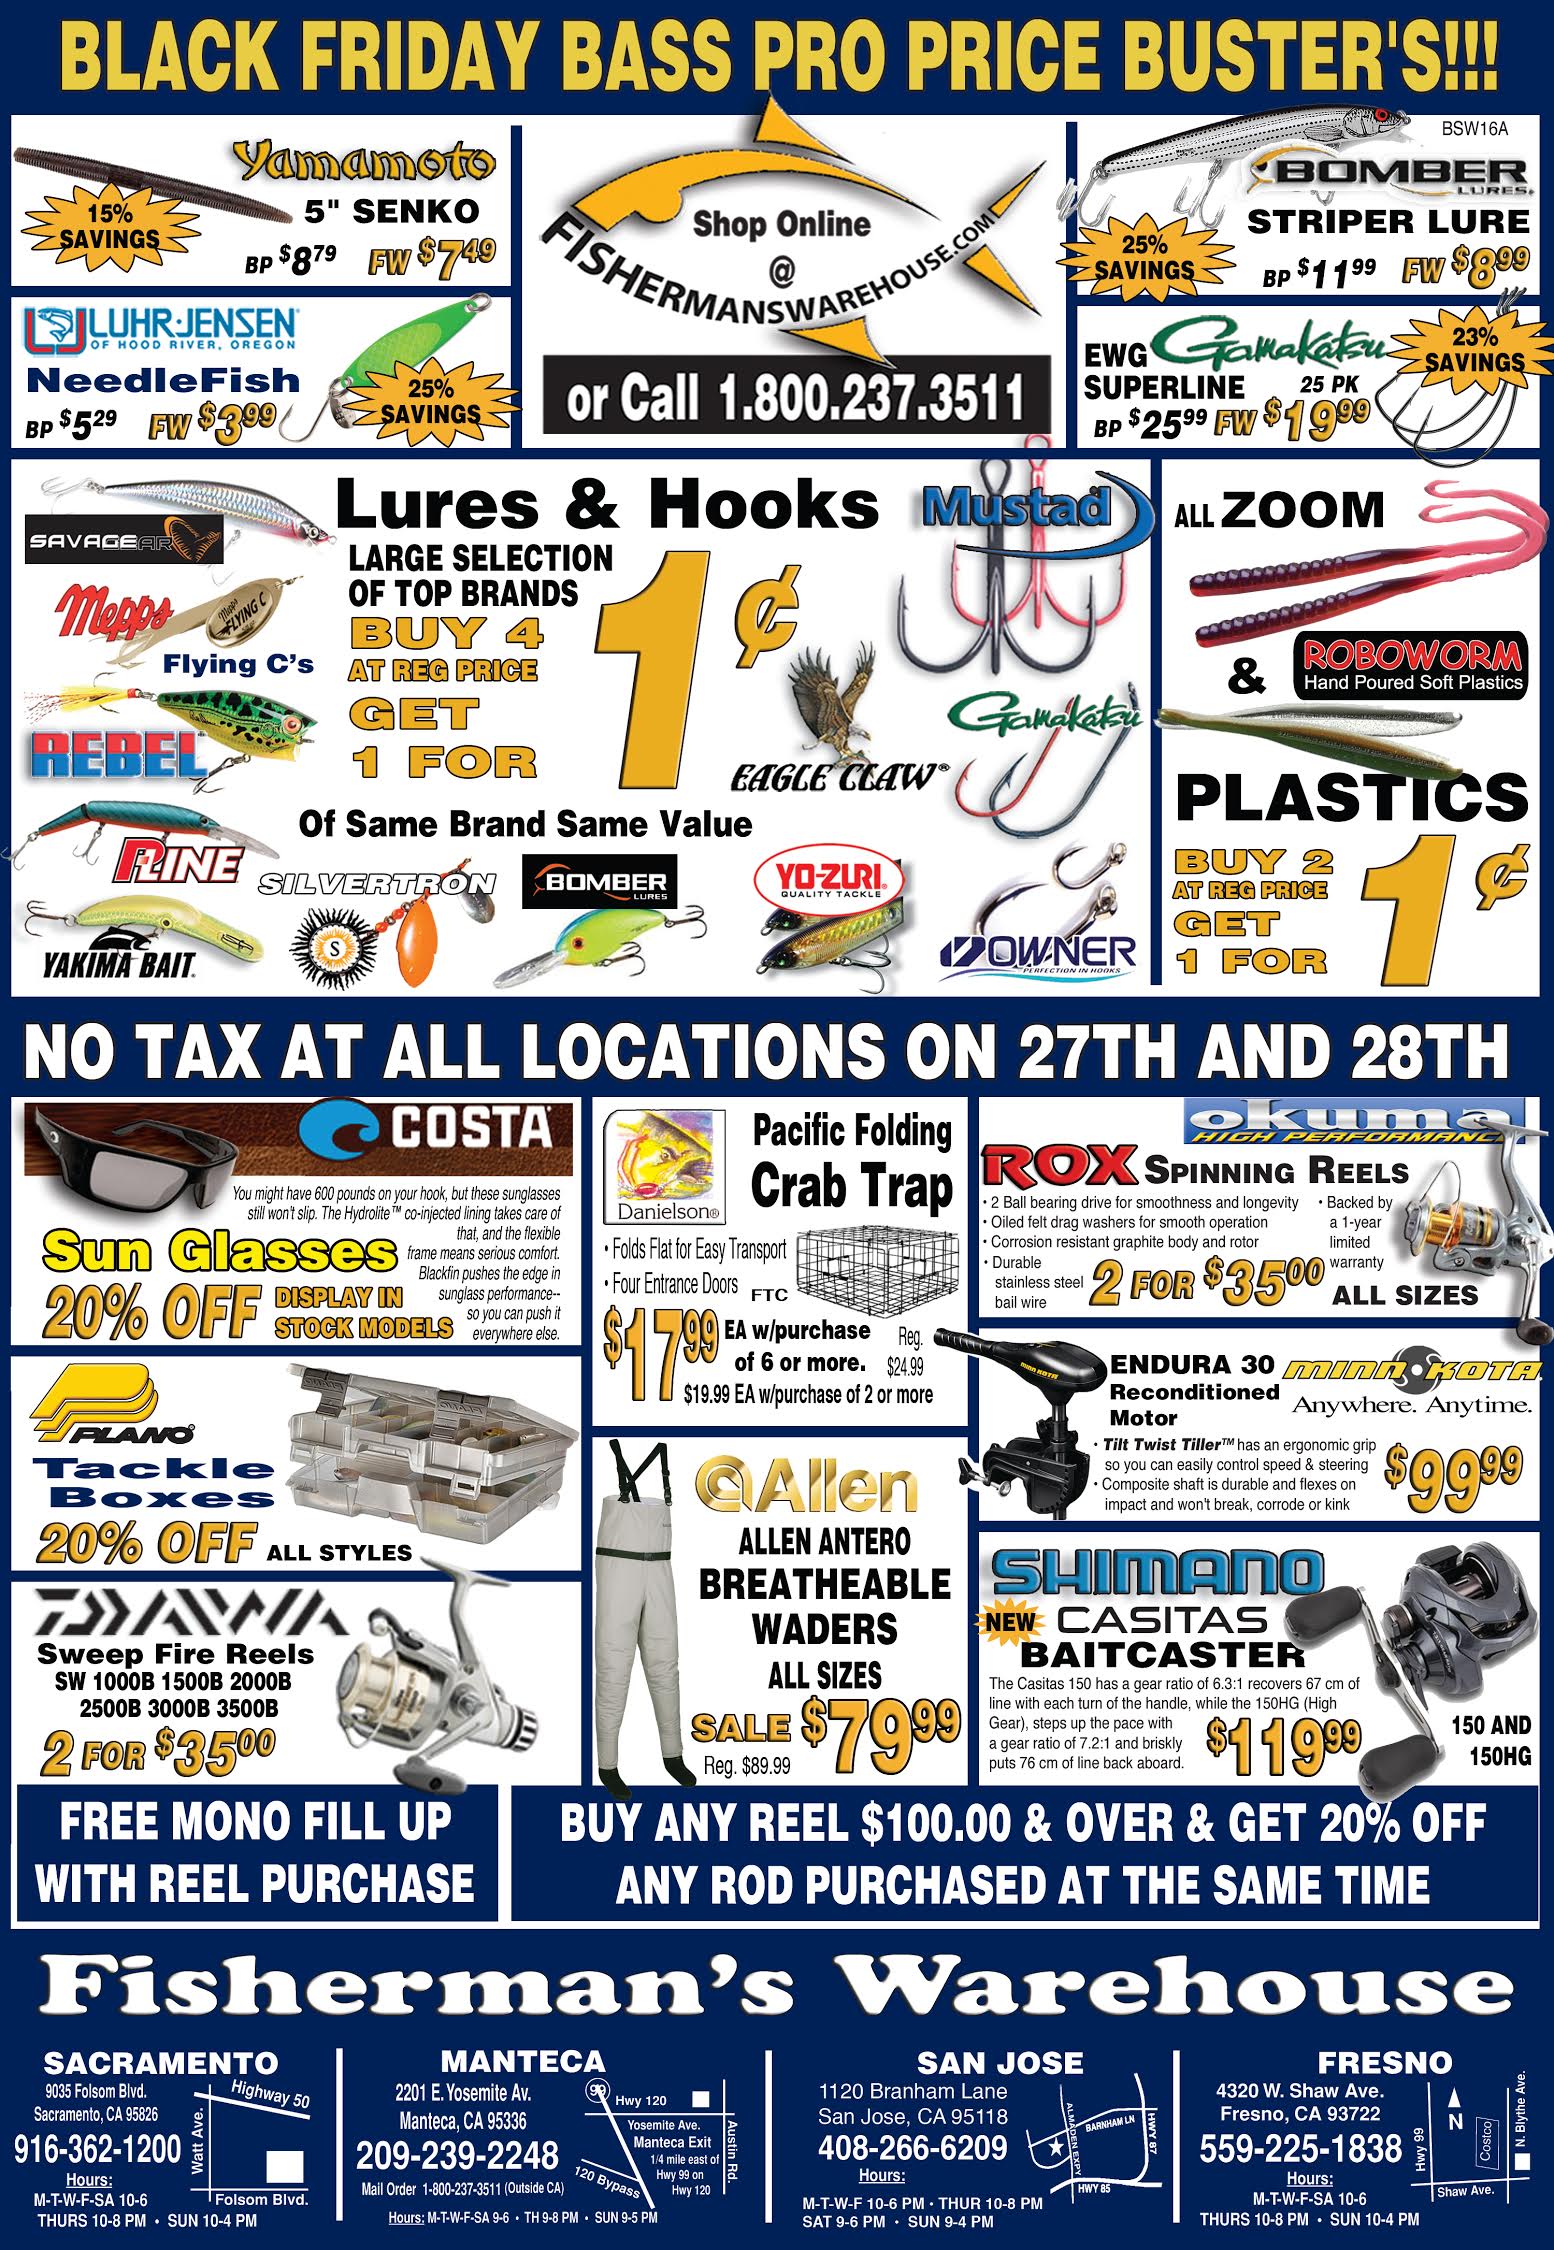 BLACK FRIDAY SPECIALS!Friday and - The Fishing Specialist